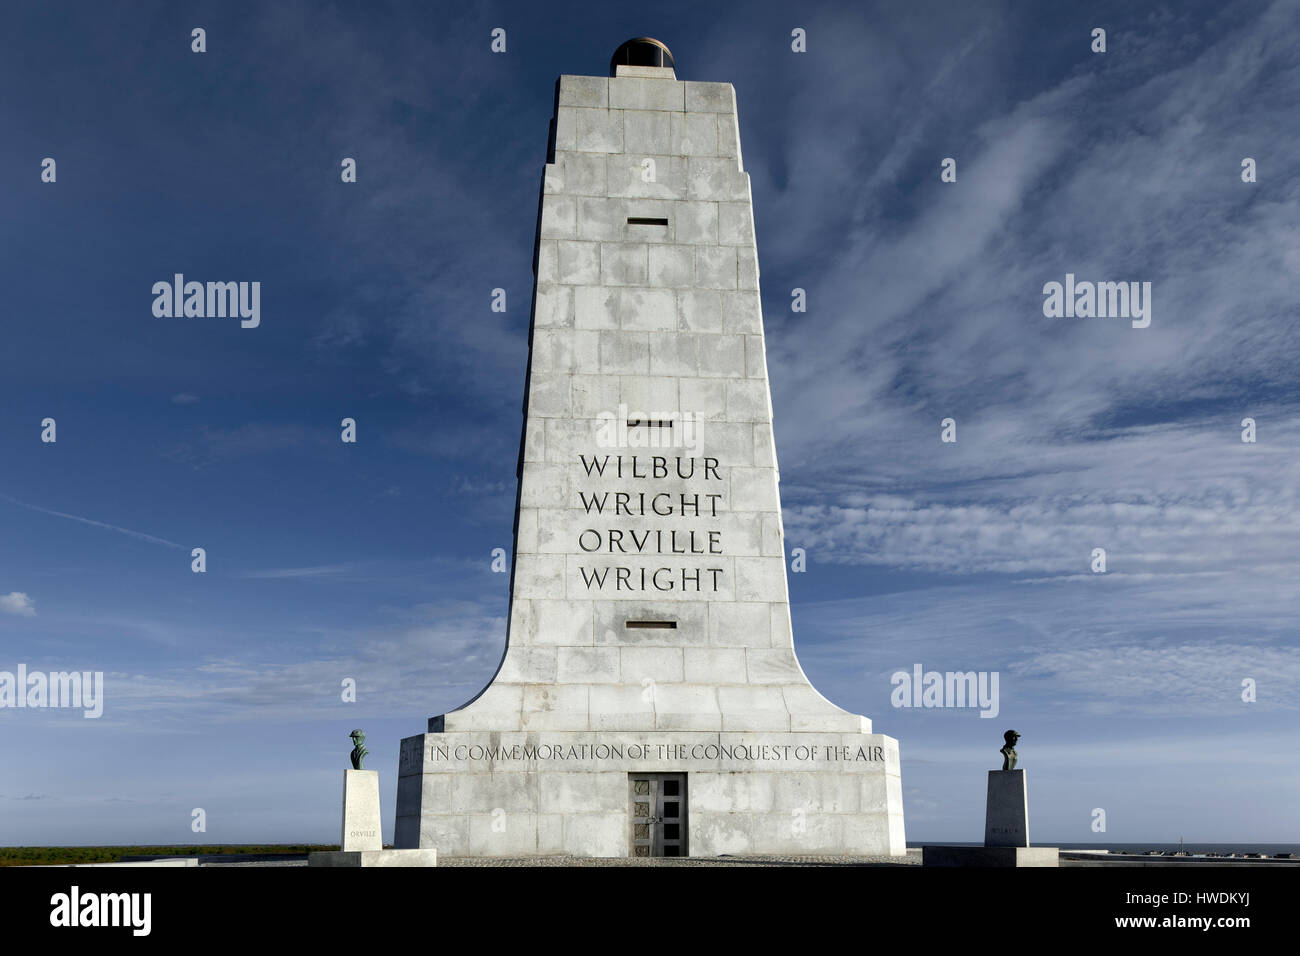 NC00646-00...NORTH CAROLINA - Monument to the Wright Brothers at the Wright Brothers National Memorial in Kitty Hawk. Stock Photo